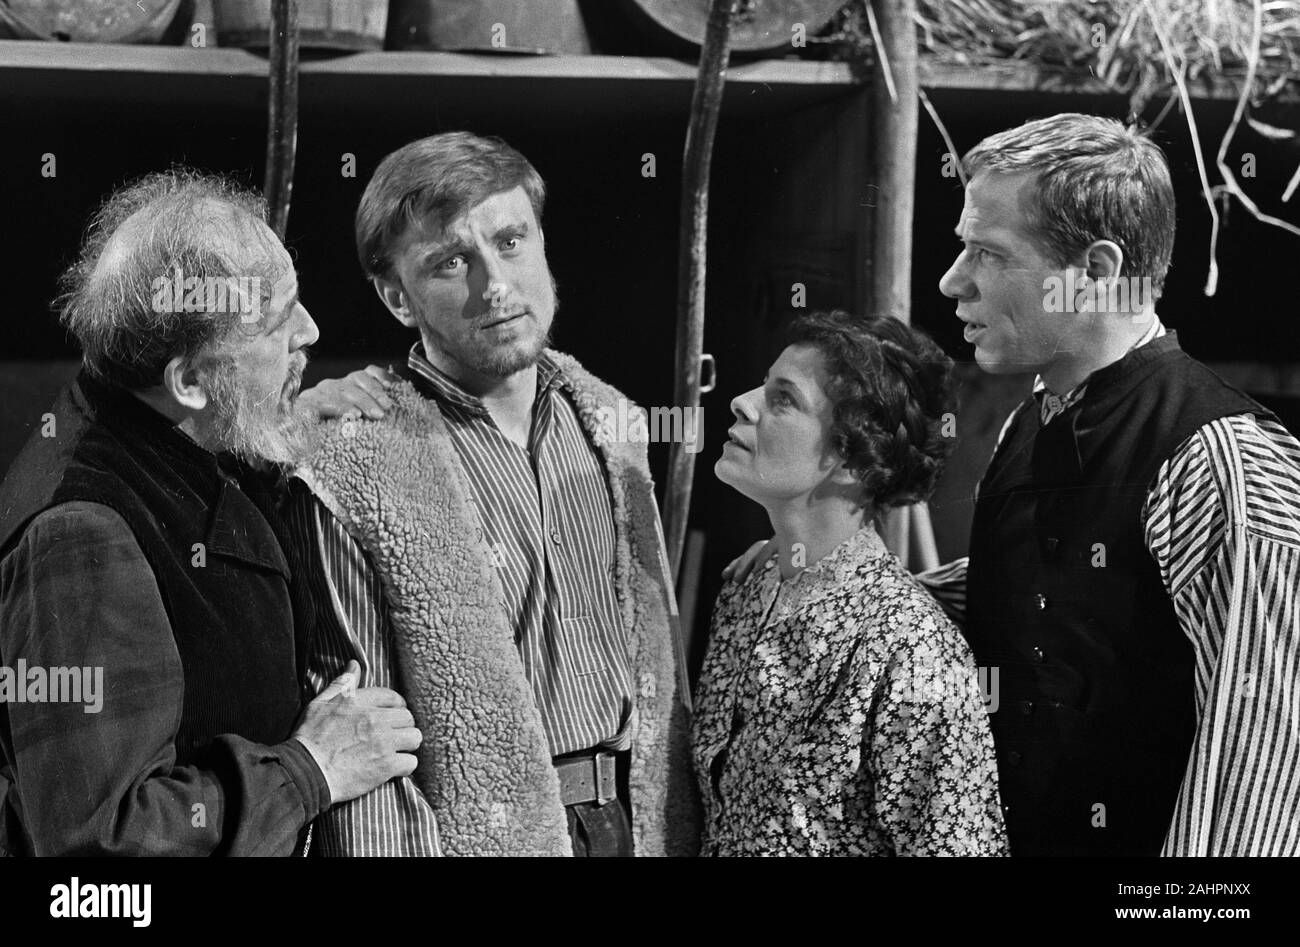 VPRO television 'The Word' by Kaj Munk for TV. From left to right Joris Diels, Peter Oosthoek, Henny Orri and Piet Römer Date April 17, 1963 Stock Photo